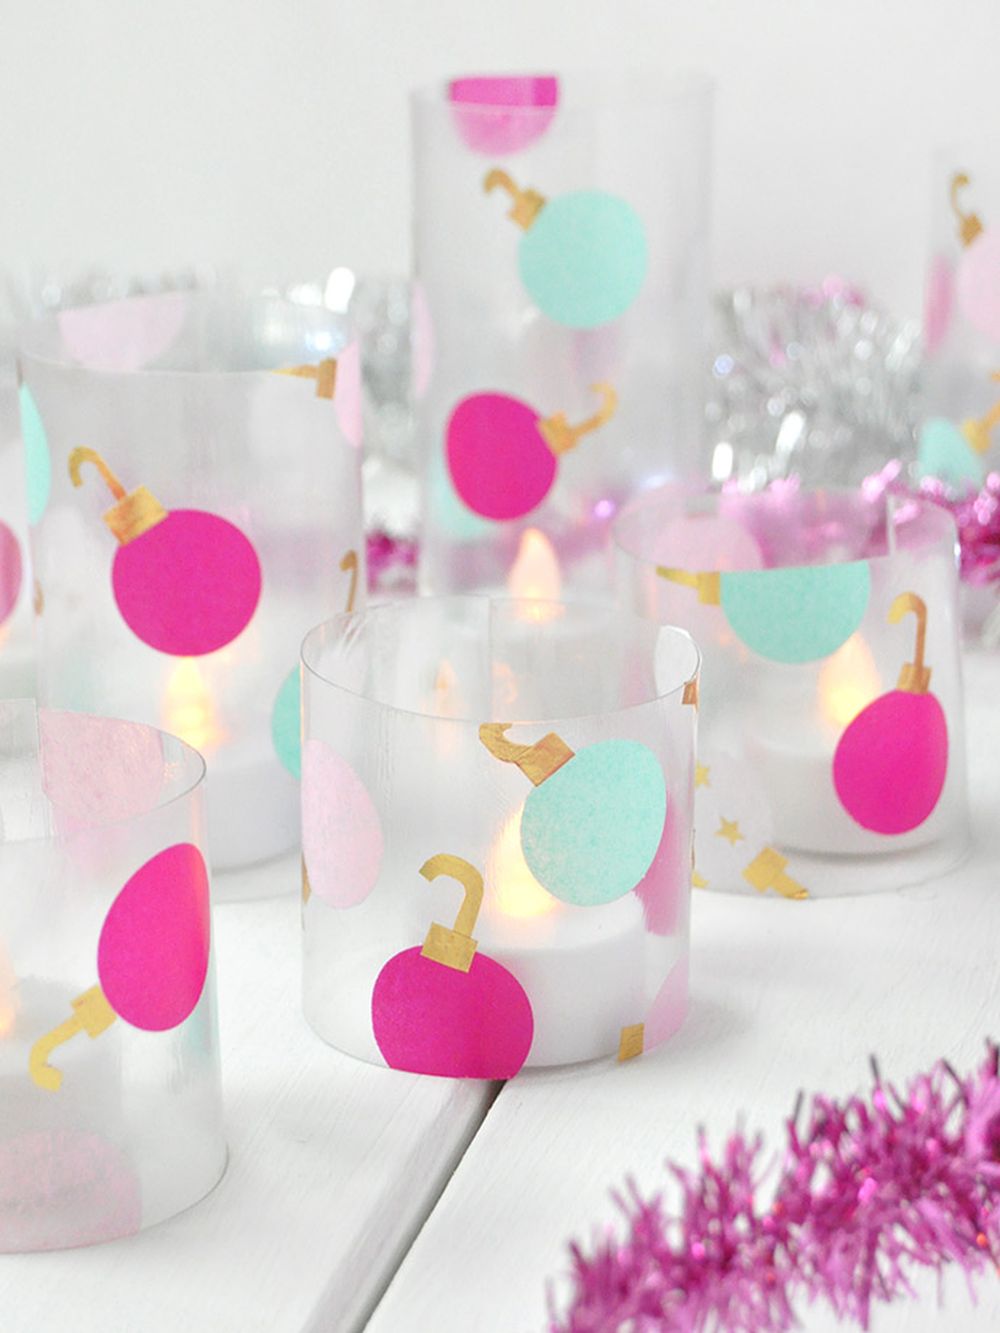 Recycled votives christmas craft ideas for kids